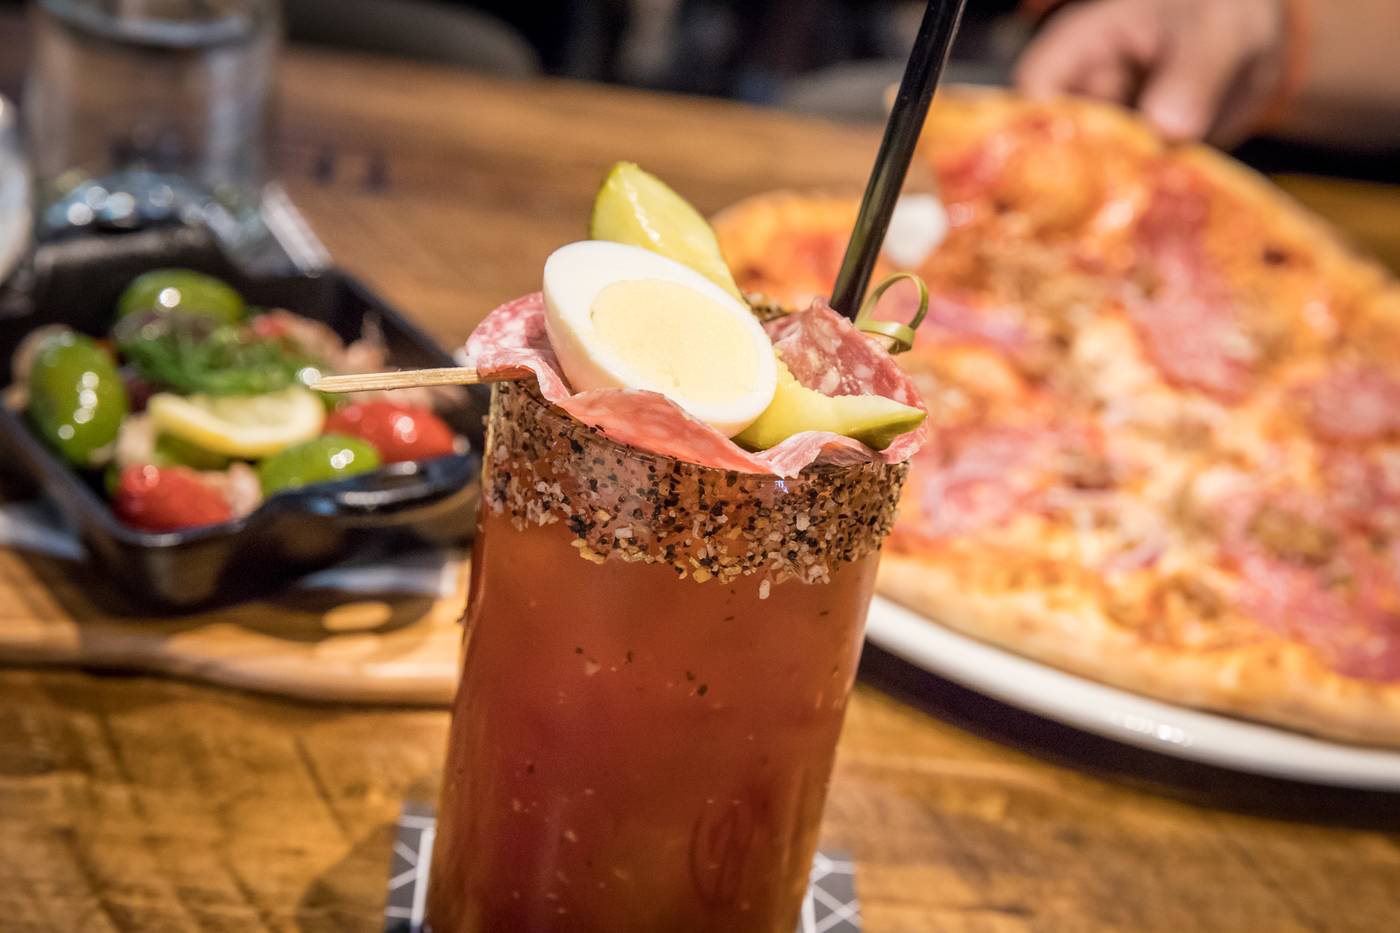 caesar drink with garnish, pizza and other side dish side view 